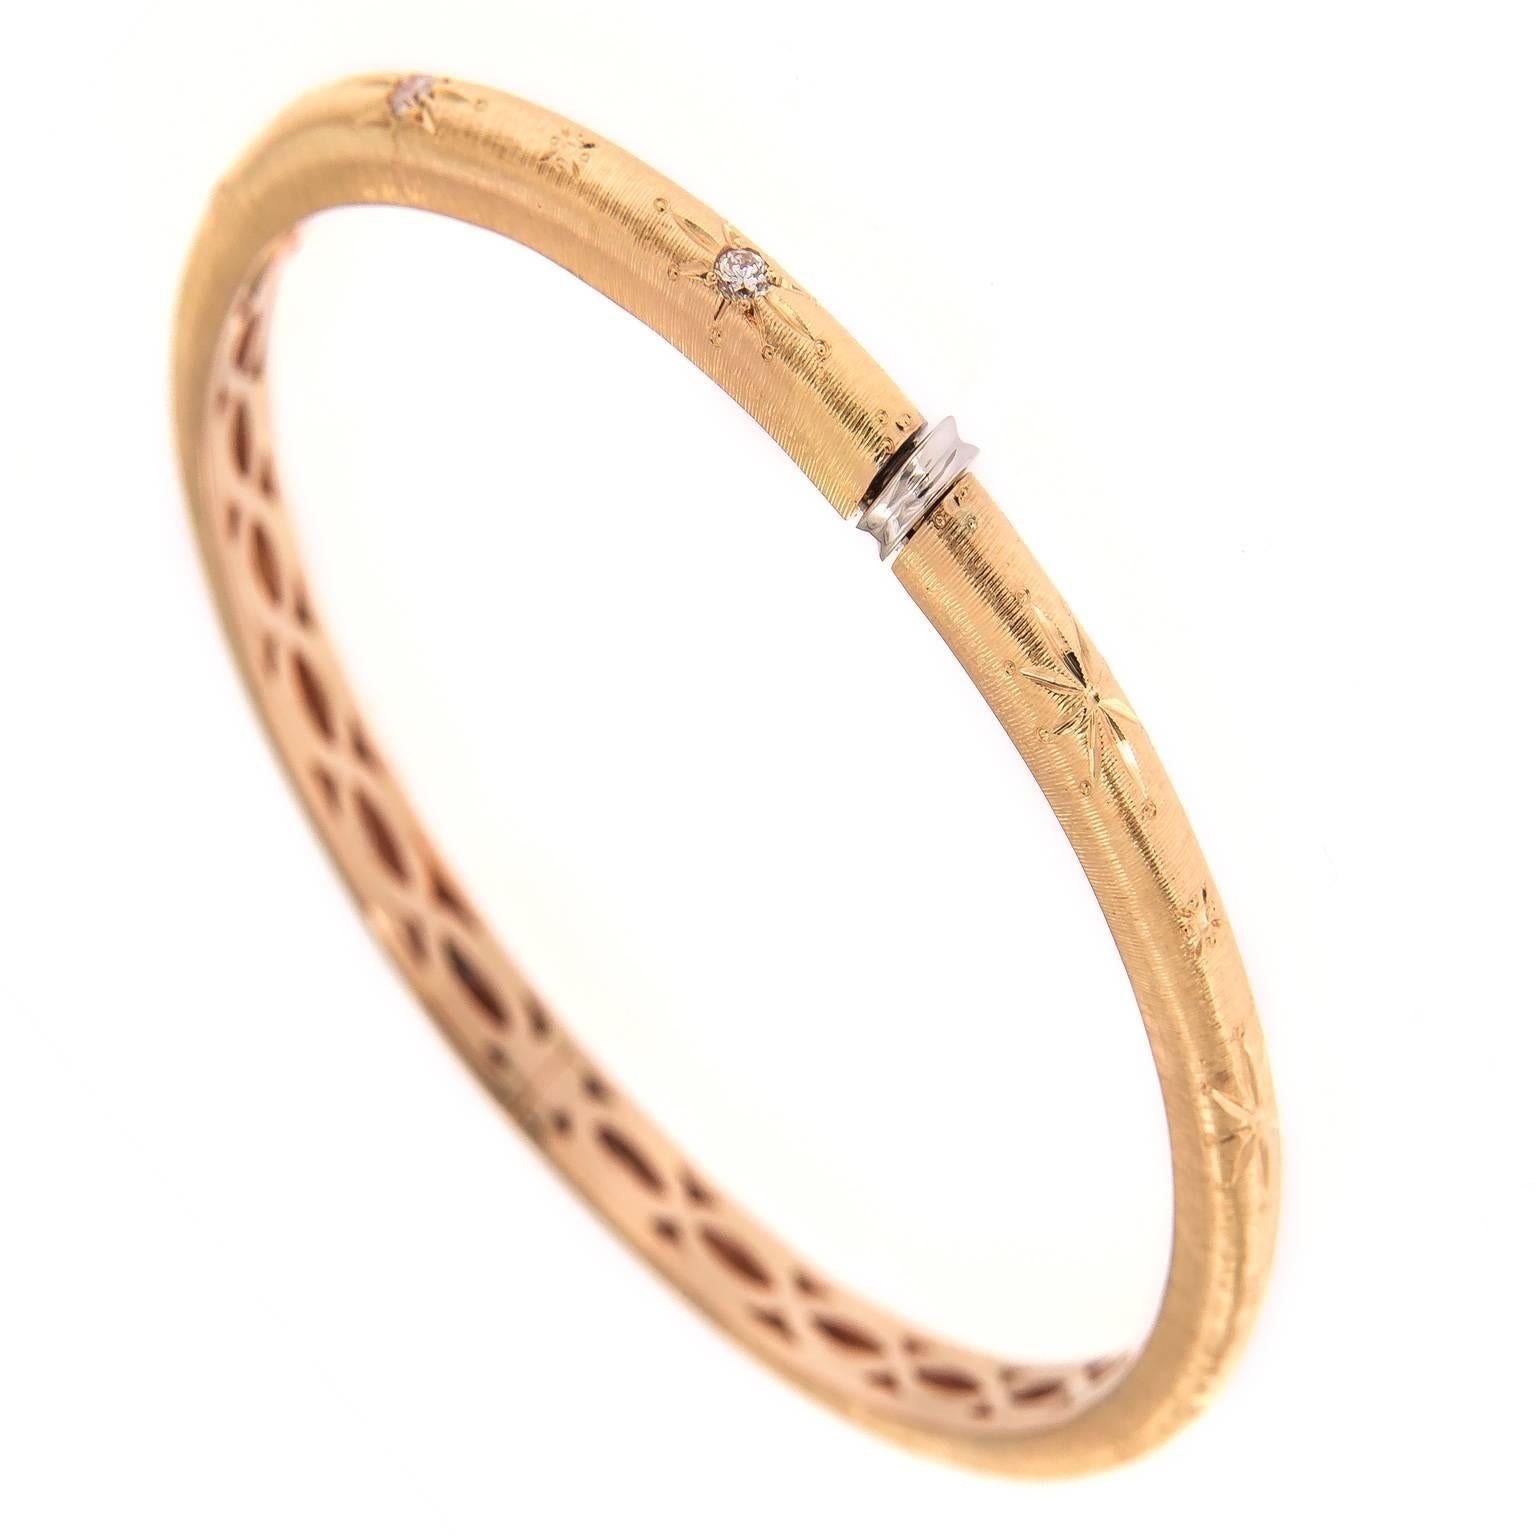 18k rose gold hinged bracelet, accented with round-cut diamonds. Bracelet is inspired by the classic Buccellati design featuring textured gold made to look like fine fabric. 
Inner diameter measures 2.25 in x 2 in

Diamond 0.35 cttw